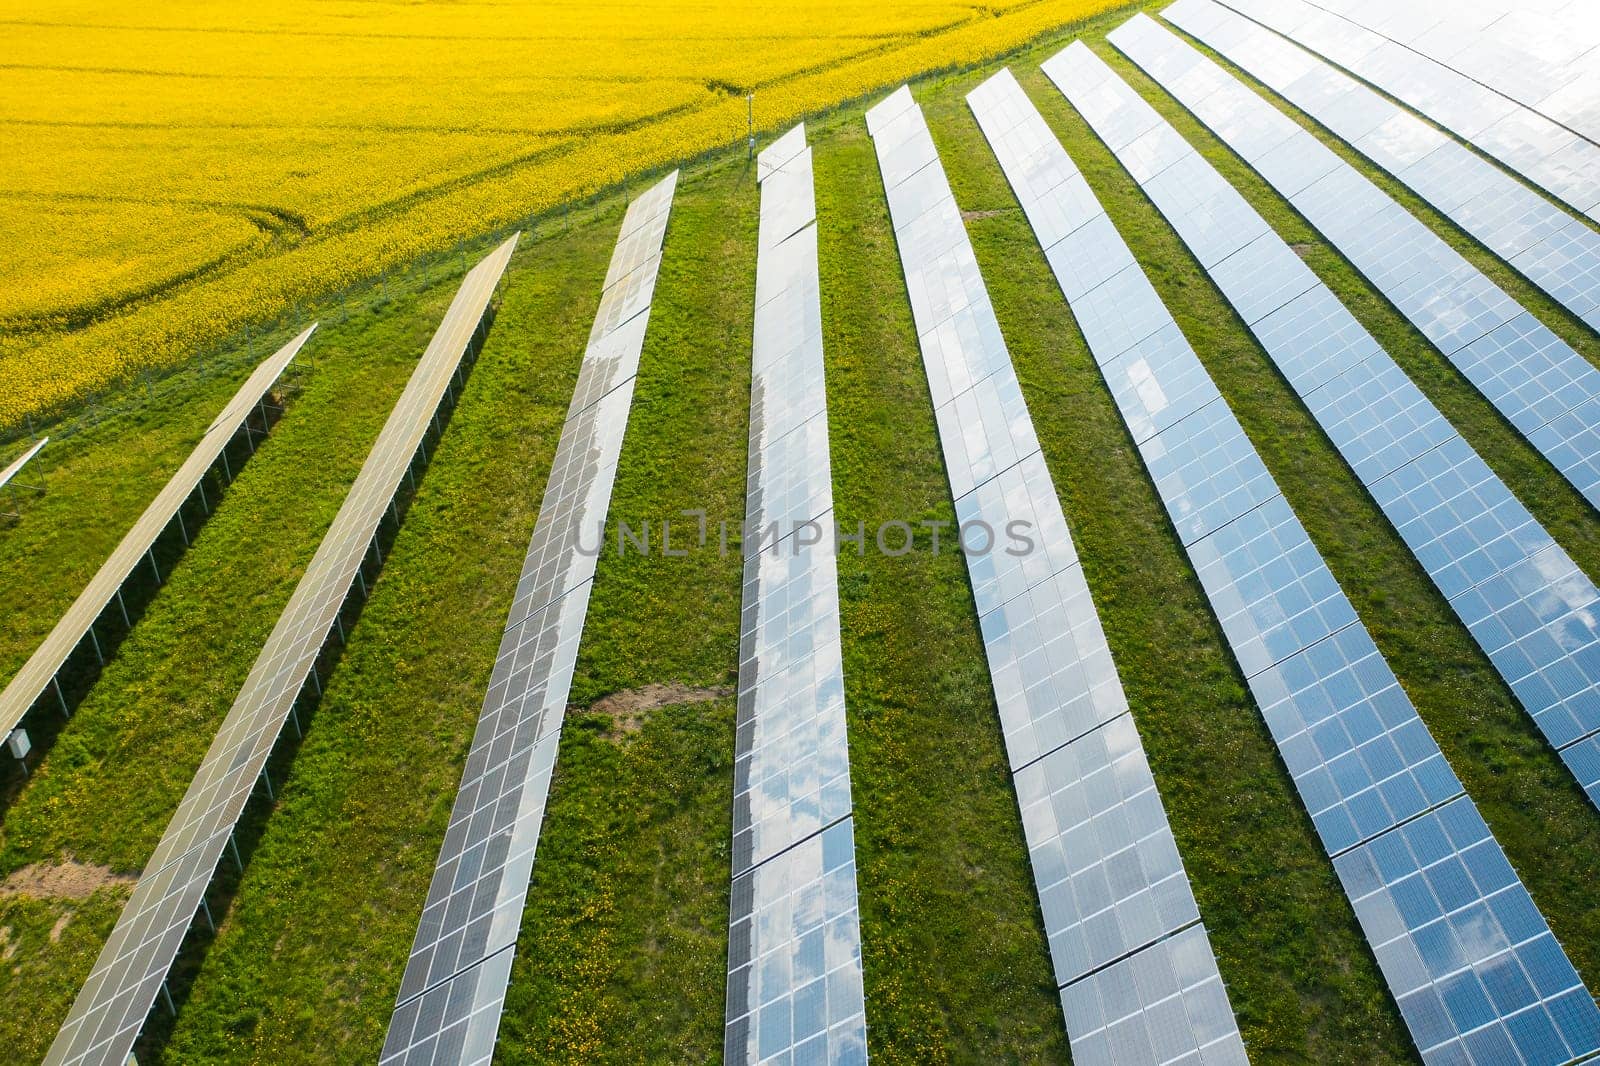 Long rows of sun panels built on green field. Innovative photovoltaic solar cells provide alternative energy at station aerial view